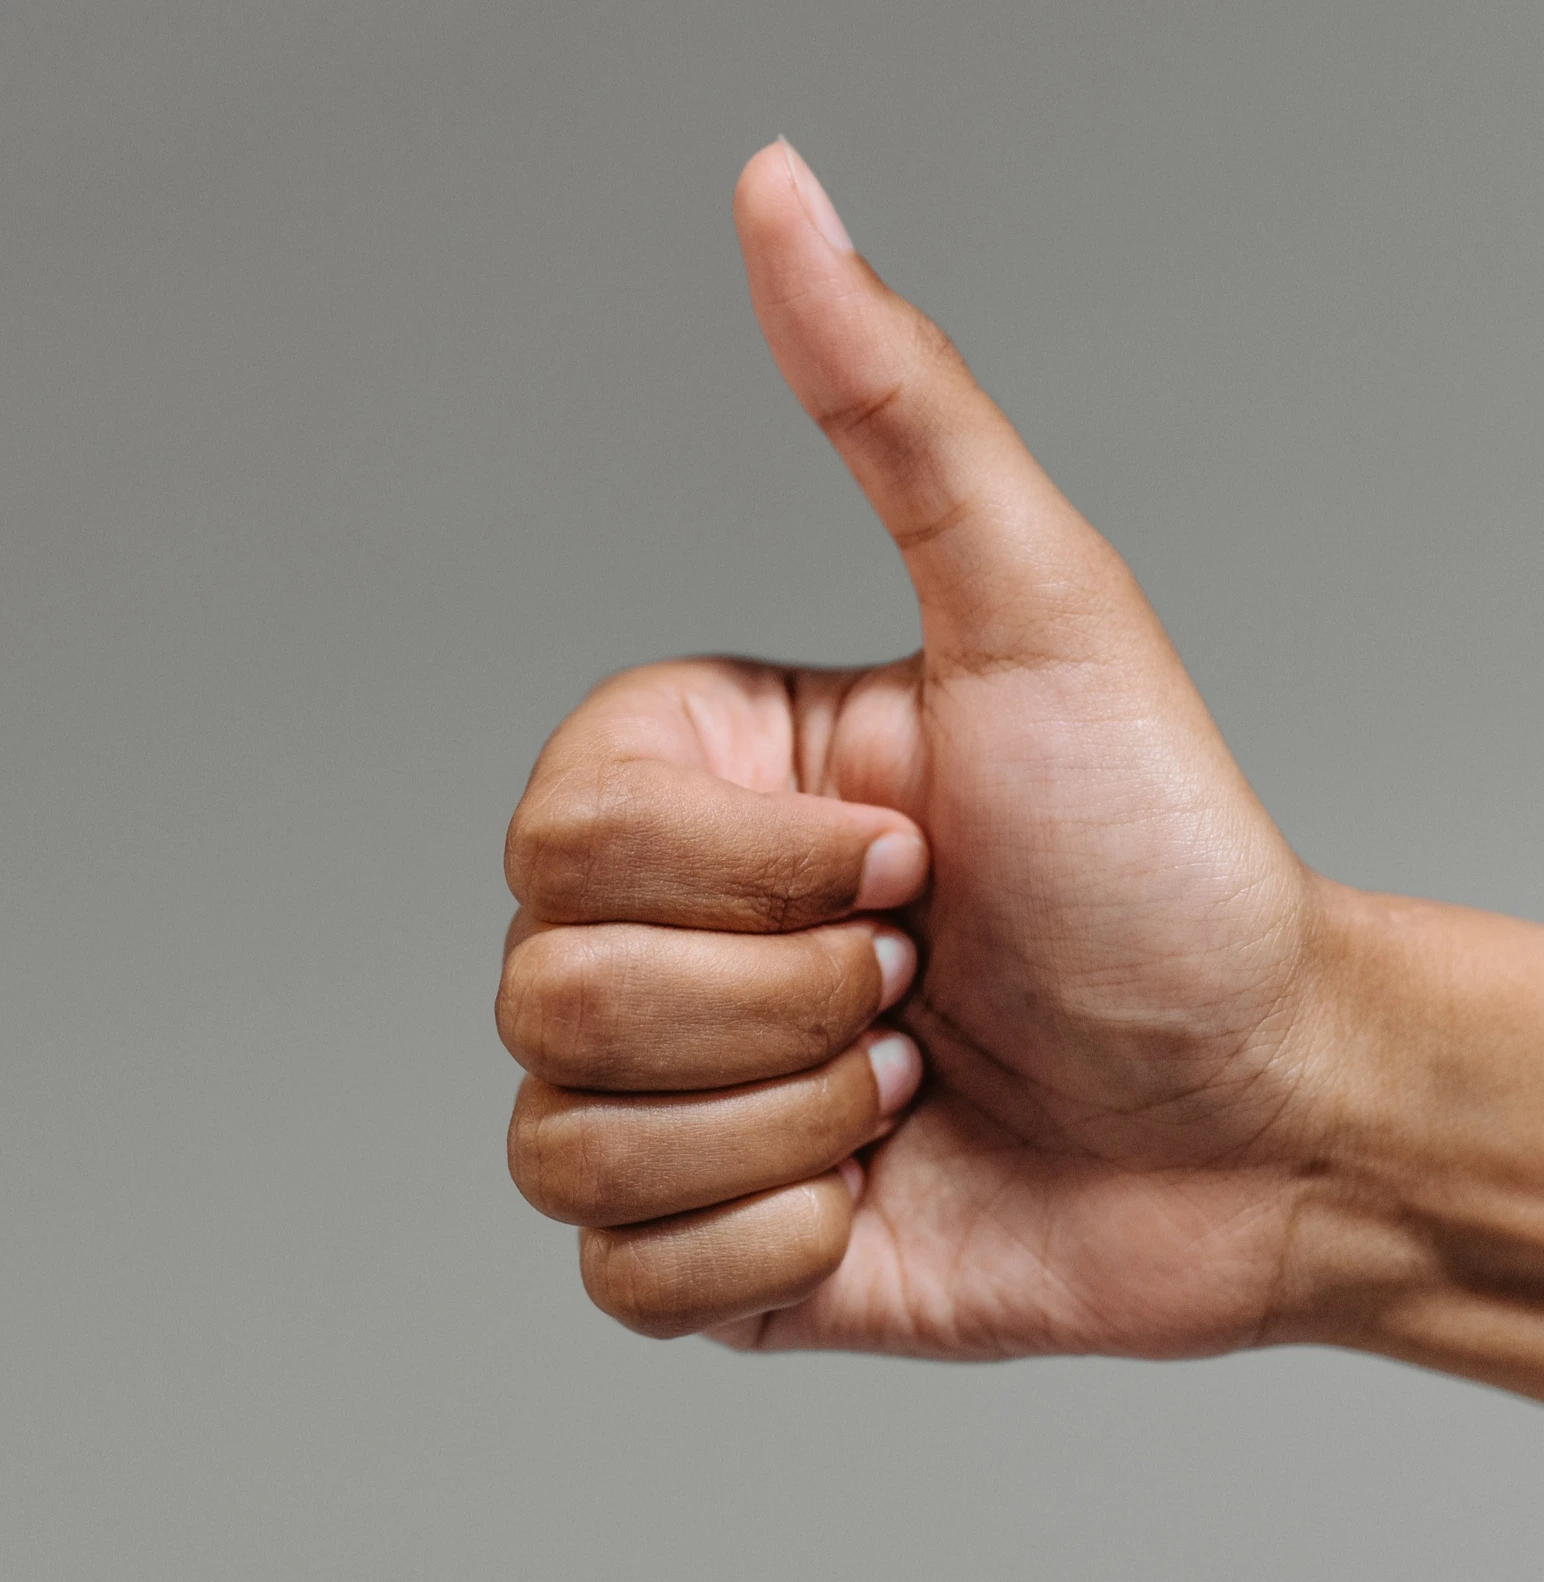 A human hand in a thumbs up position